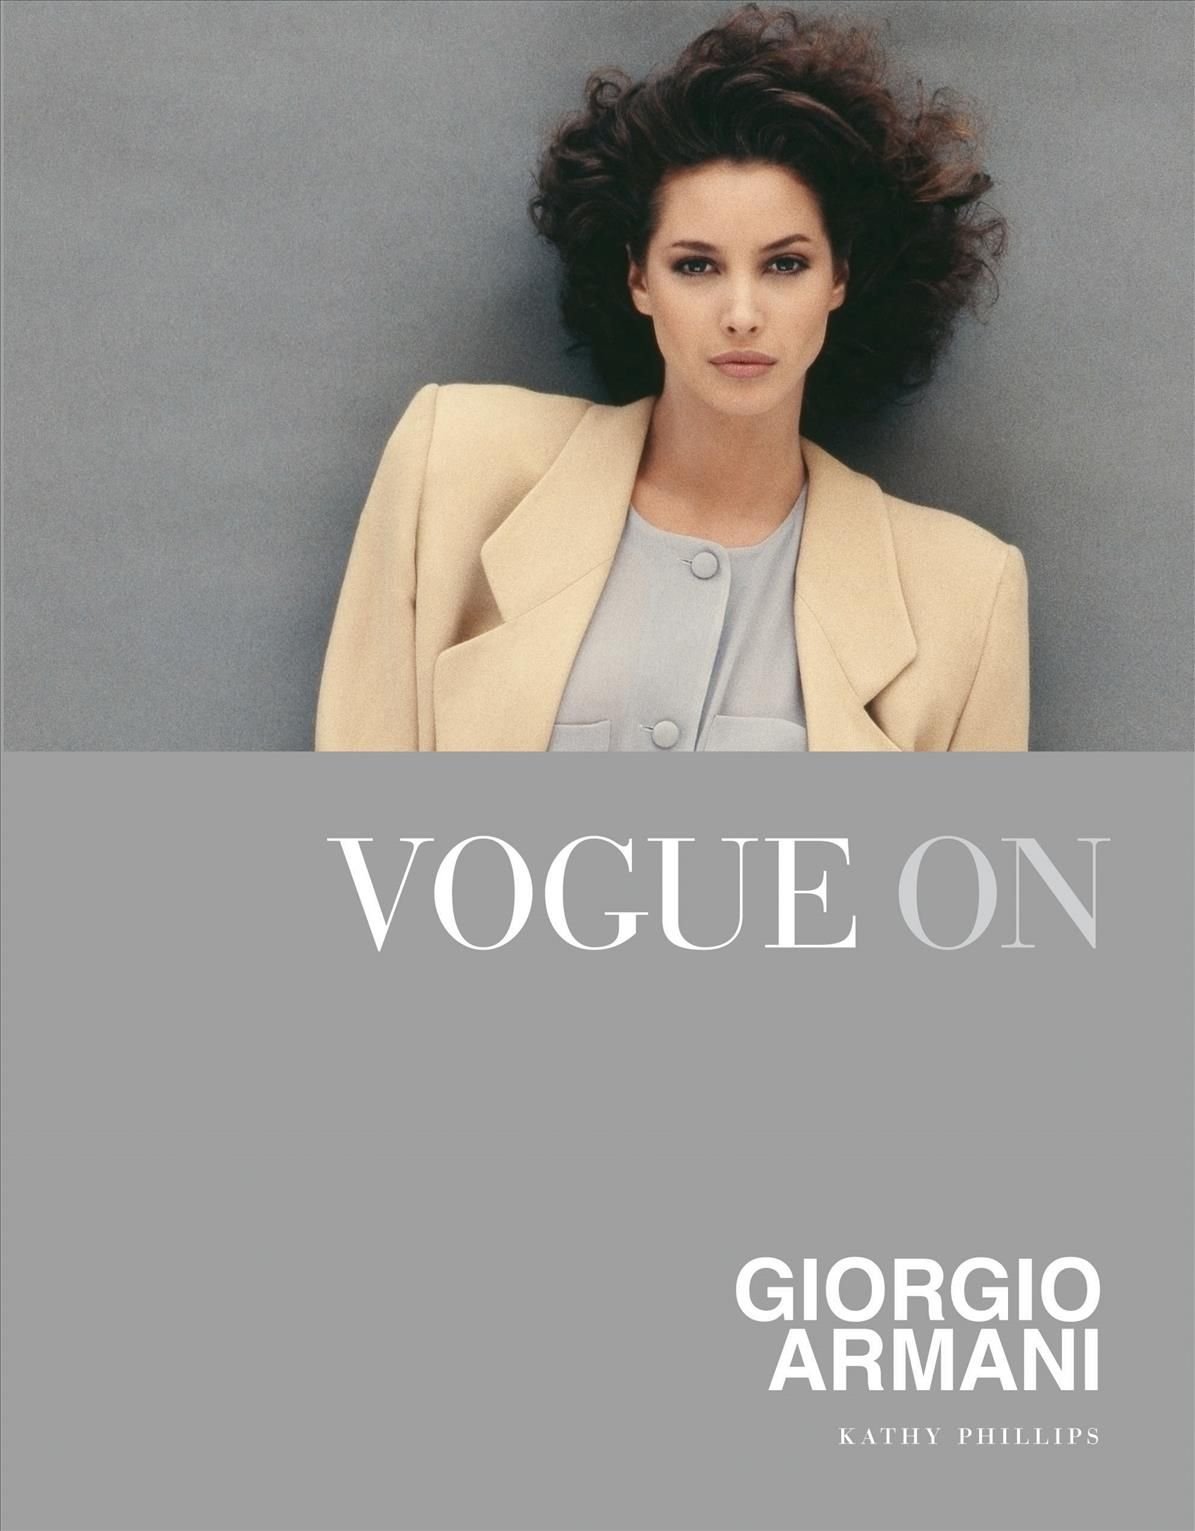 Buy Vogue on Giorgio Armani by Kathy Phillips, Giorgio Armani With Free  Delivery